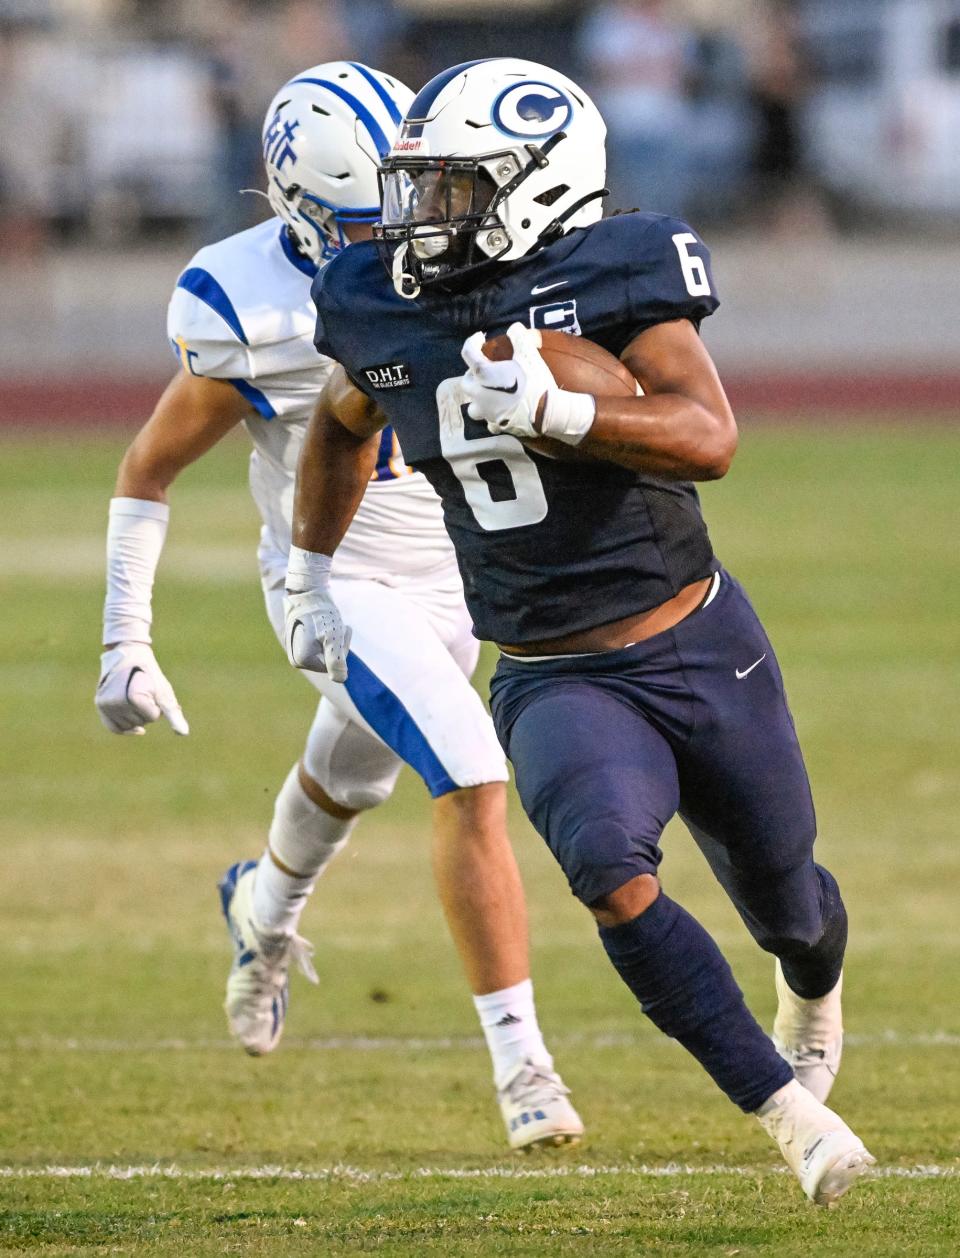 Central Valley Christian's Bryson Donelson runs against Ripon Christian in a non-league high school football game on Friday, August 18, 2023.